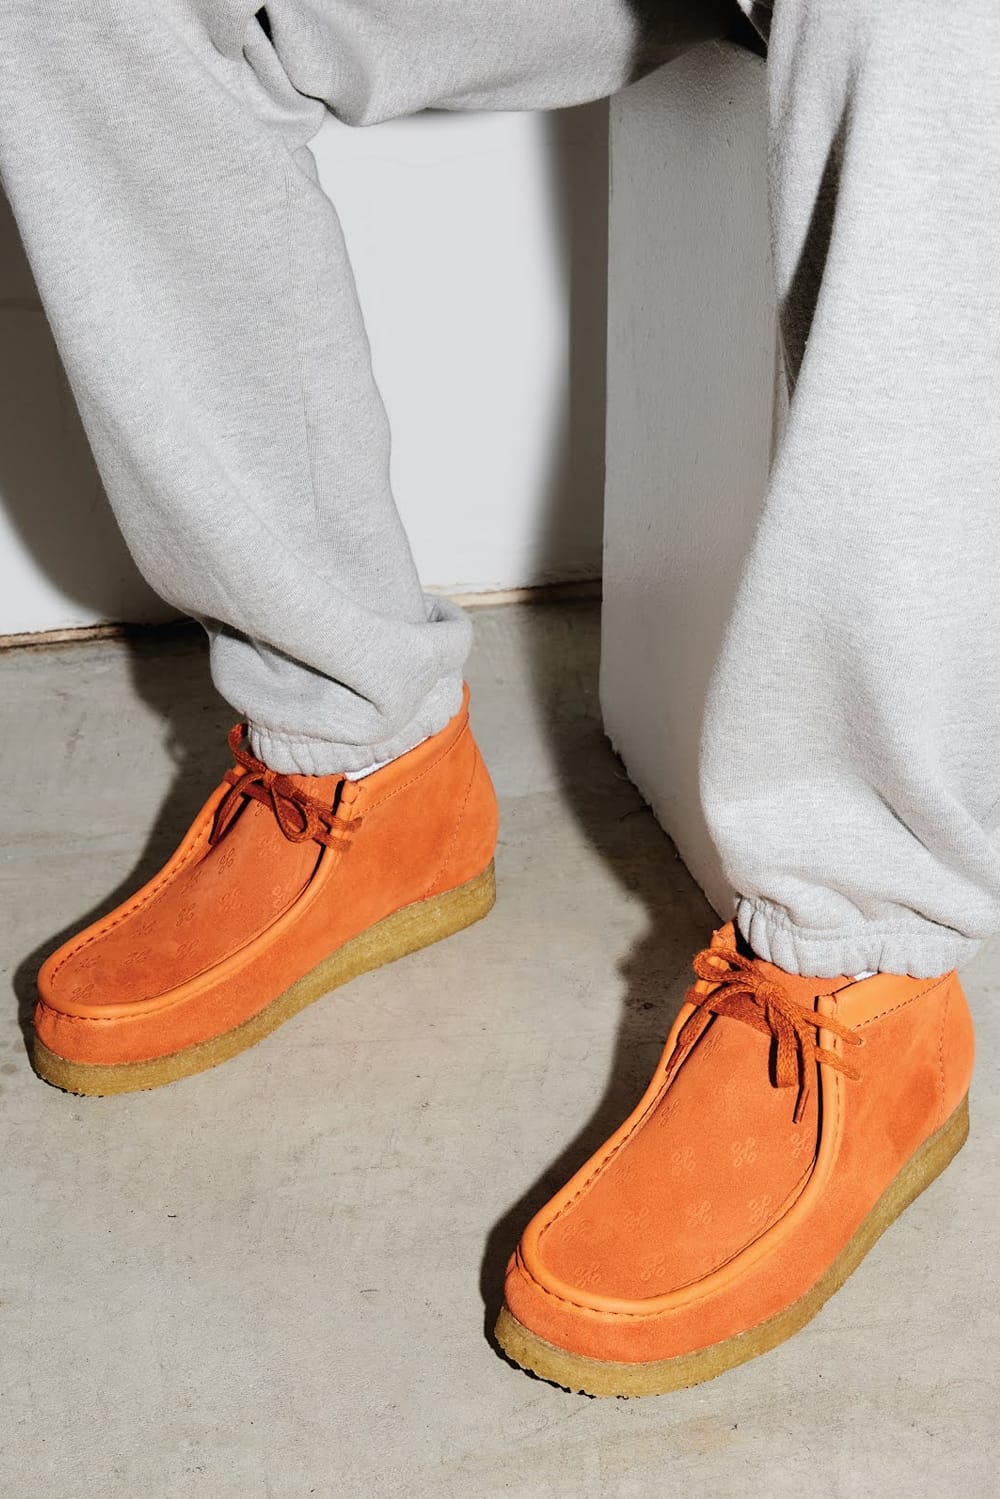 OVO Reveals Clarks Collaboration in New 